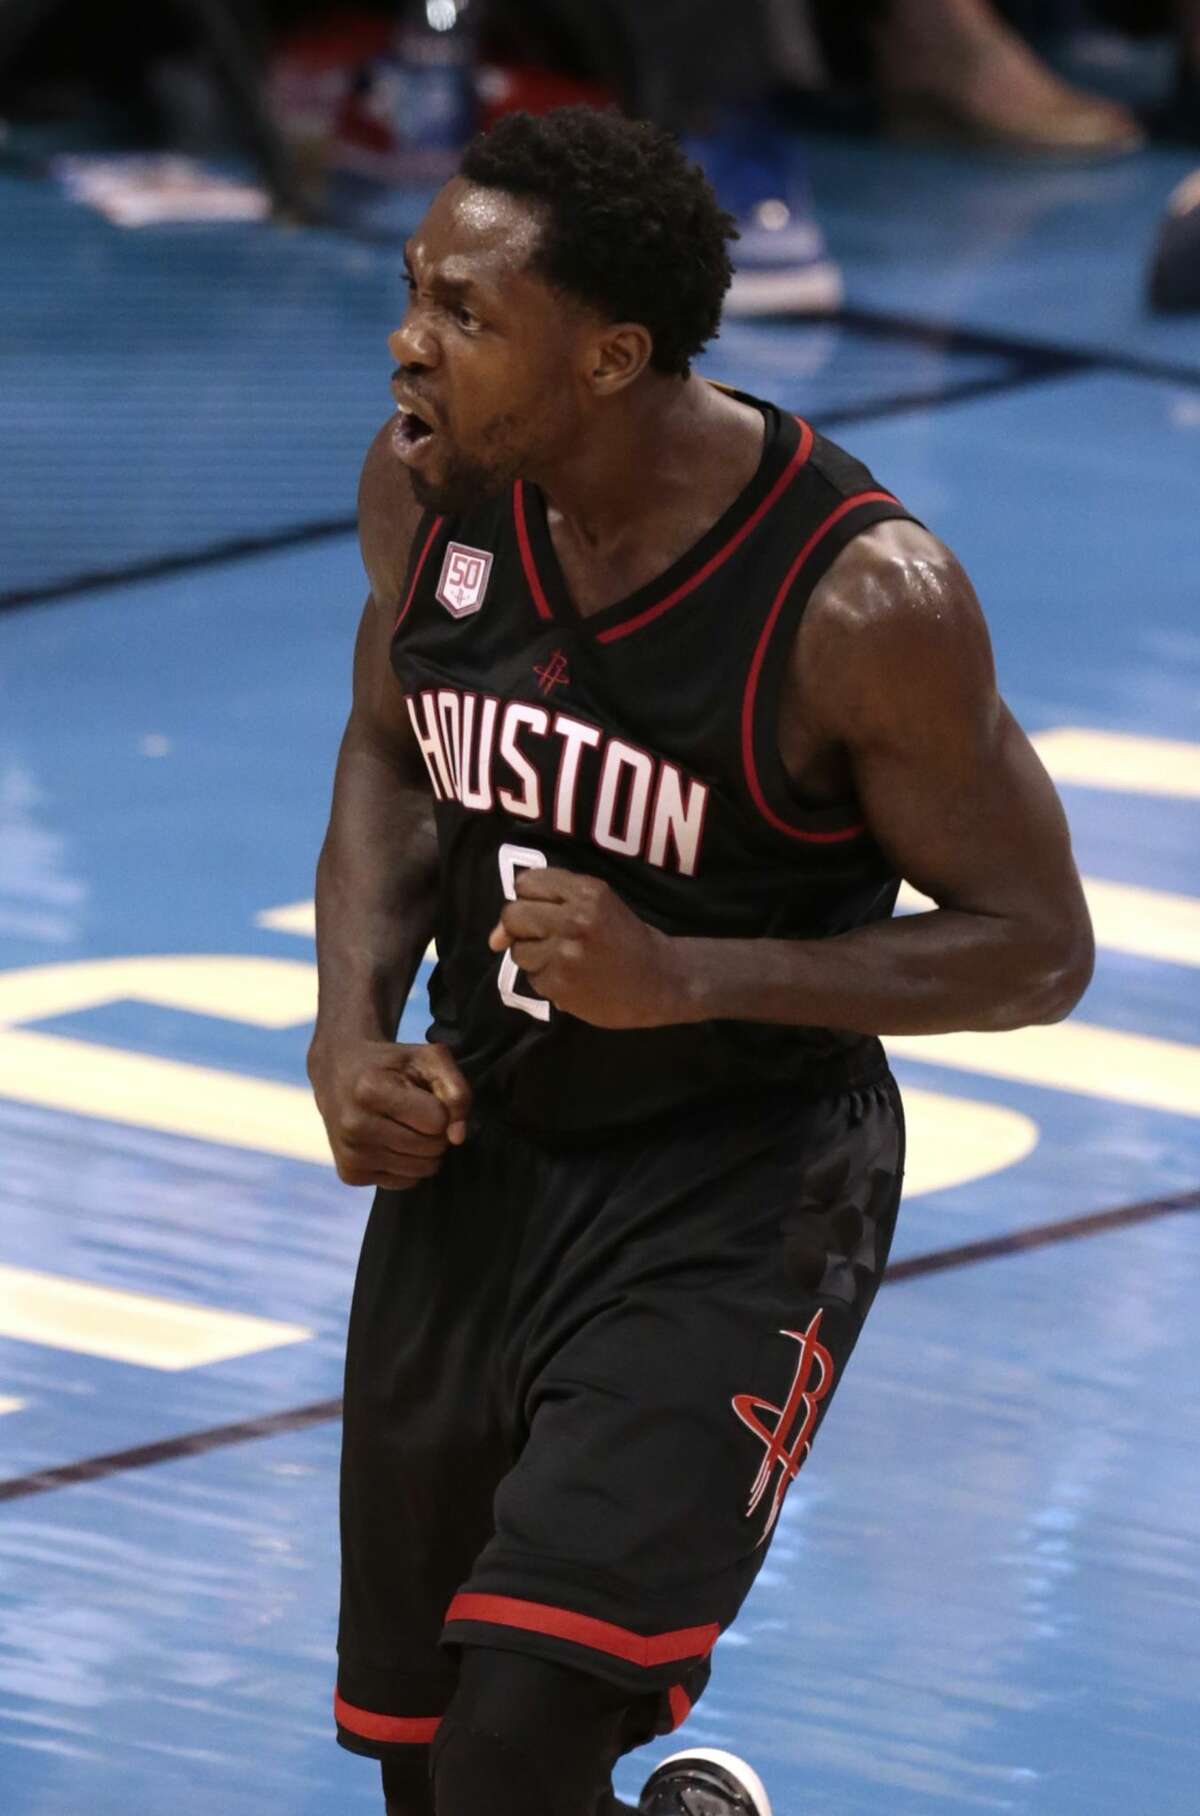 Houston Rockets guard Patrick Beverley (2) celebrates an Oklahoma City Thunder turnover during the fourth quarter of Game 4 of the NBA Western Conference first-round playoff series at Chesapeake Energy Arena on Sunday, April 23, 2017, in Oklahoma City. The Rockets beat the Thunder 113-109, to take a 3-1 lead in the best-of-seven series. ( Brett Coomer / Houston Chronicle )